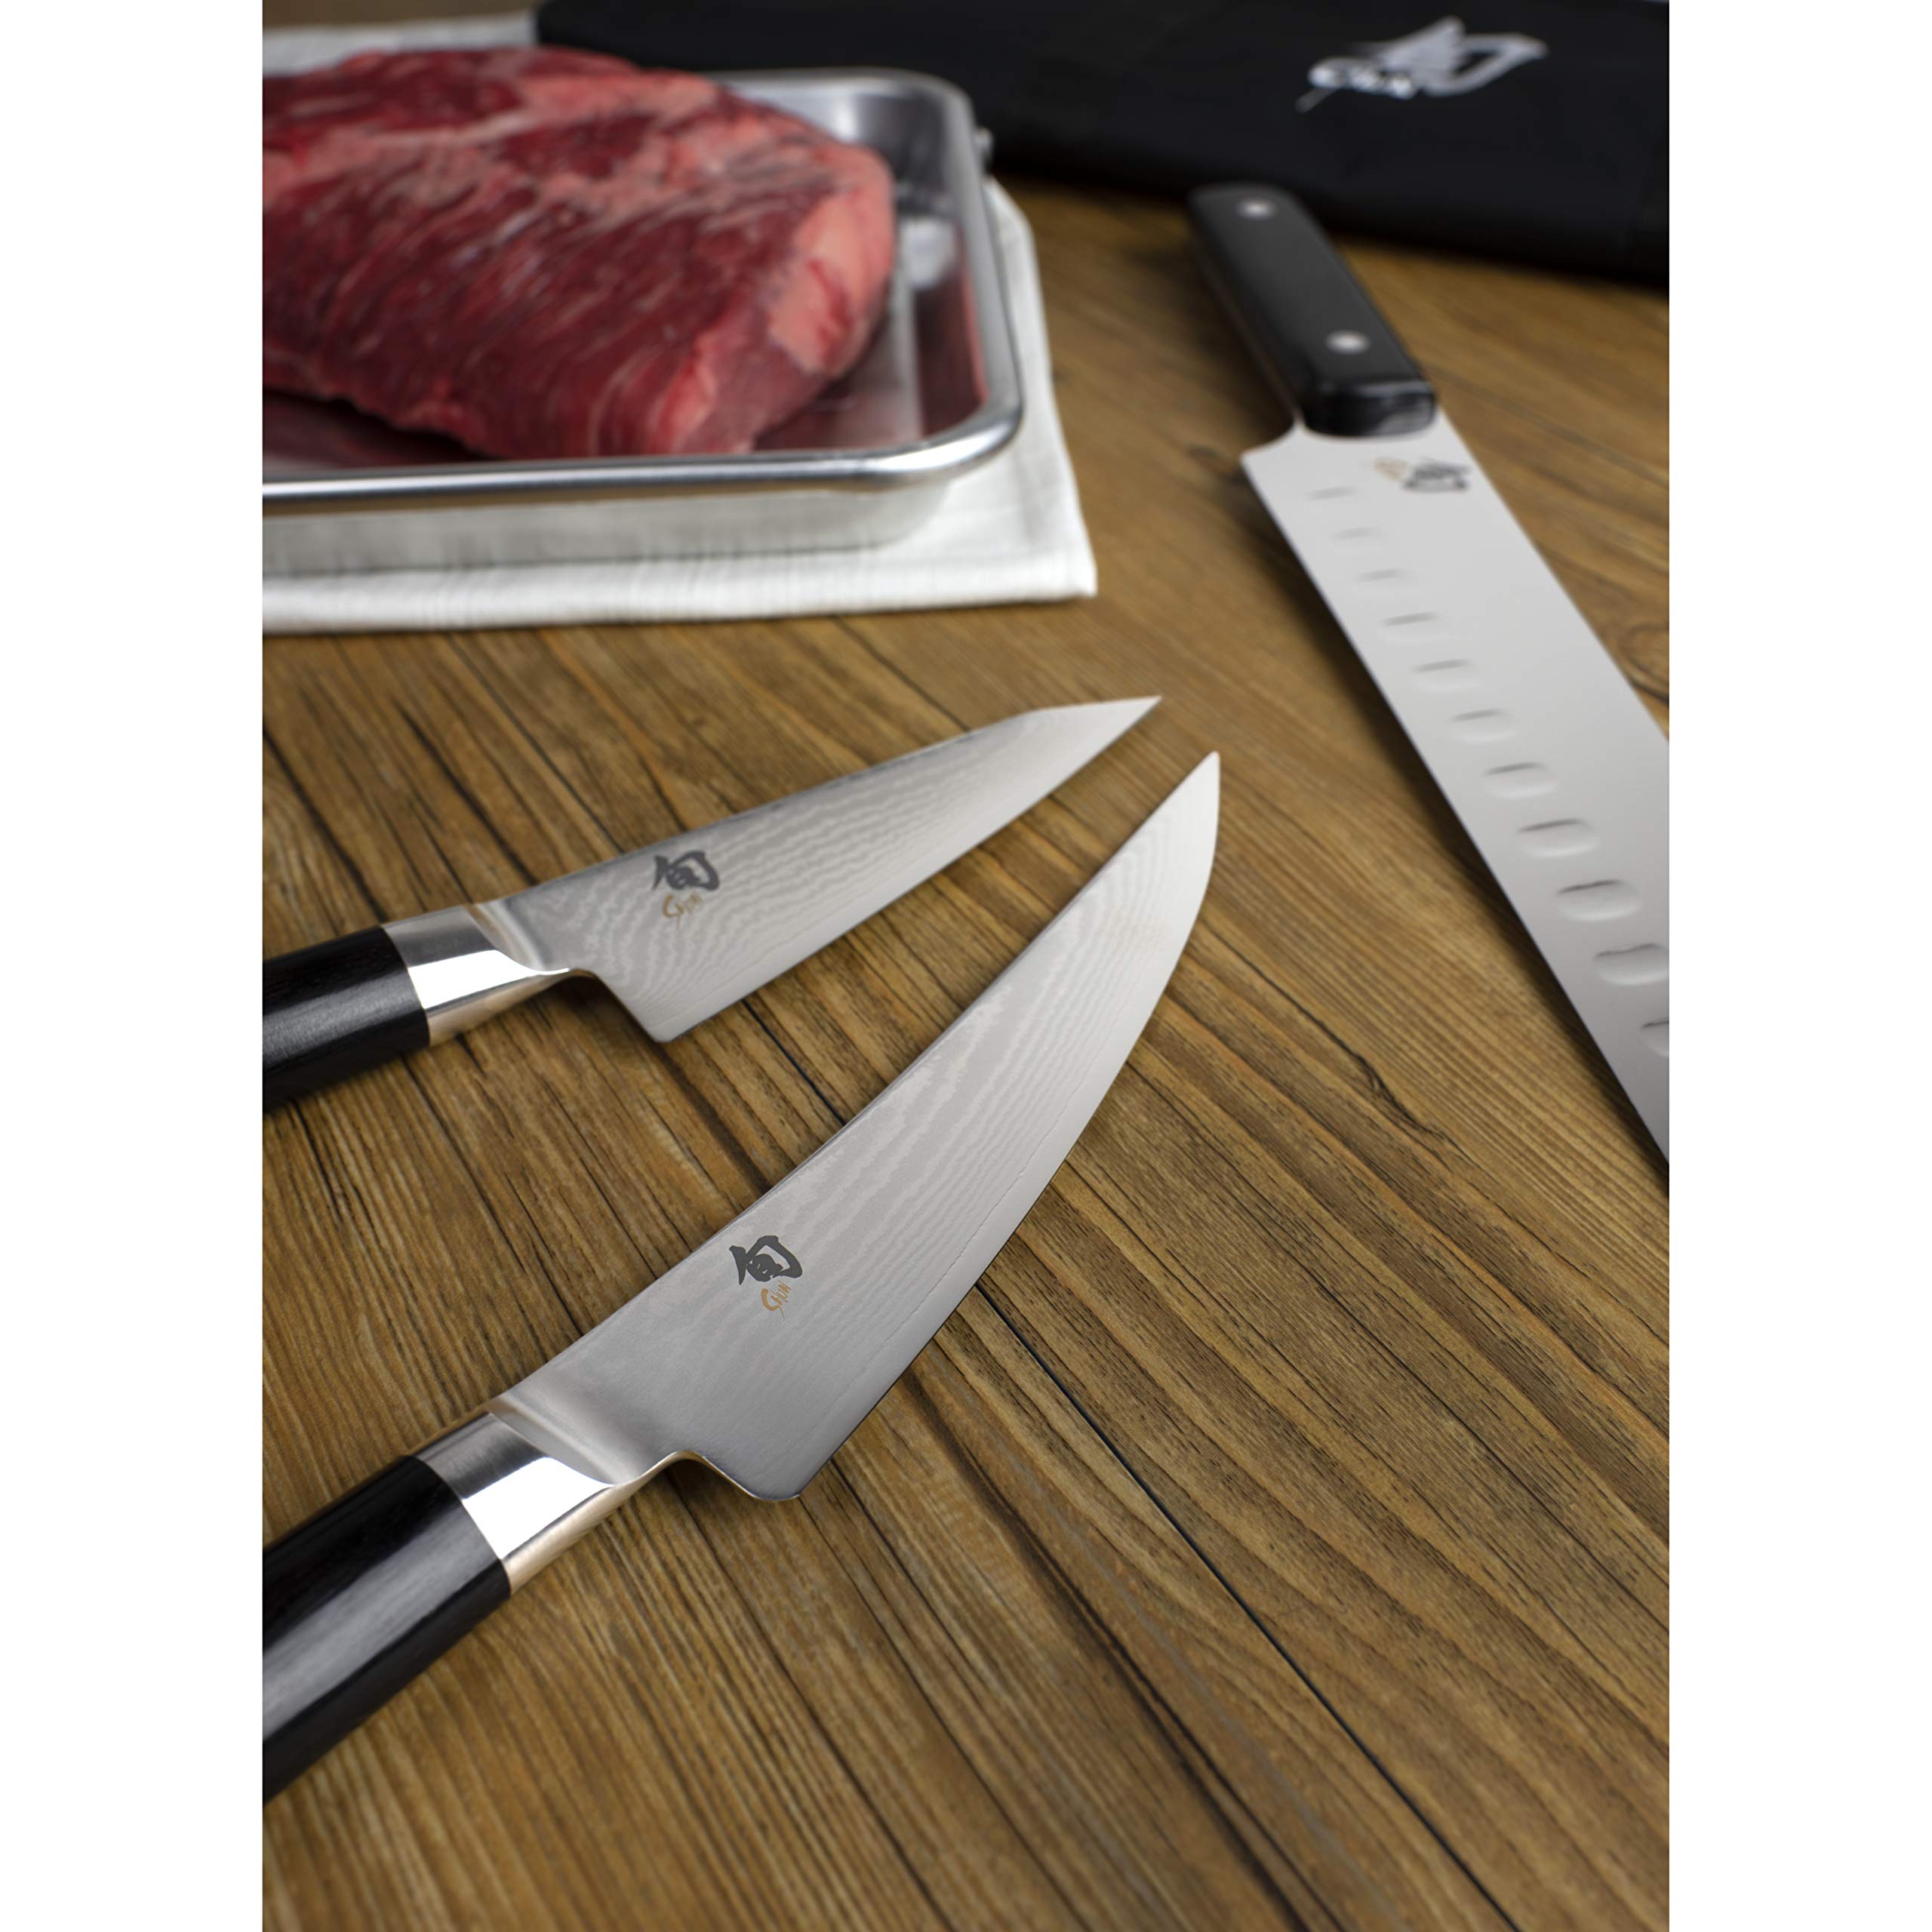 Shun Cutlery Classic 4 Piece BBQ Knife Set, Kitchen Knife Set with Knife Roll, Includes 4.5" Asian Multi-Prep Knife, 6" Boning/Fillet Knife, and 12" Brisket Knife, Handcrafted Japanese Kitchen Knives